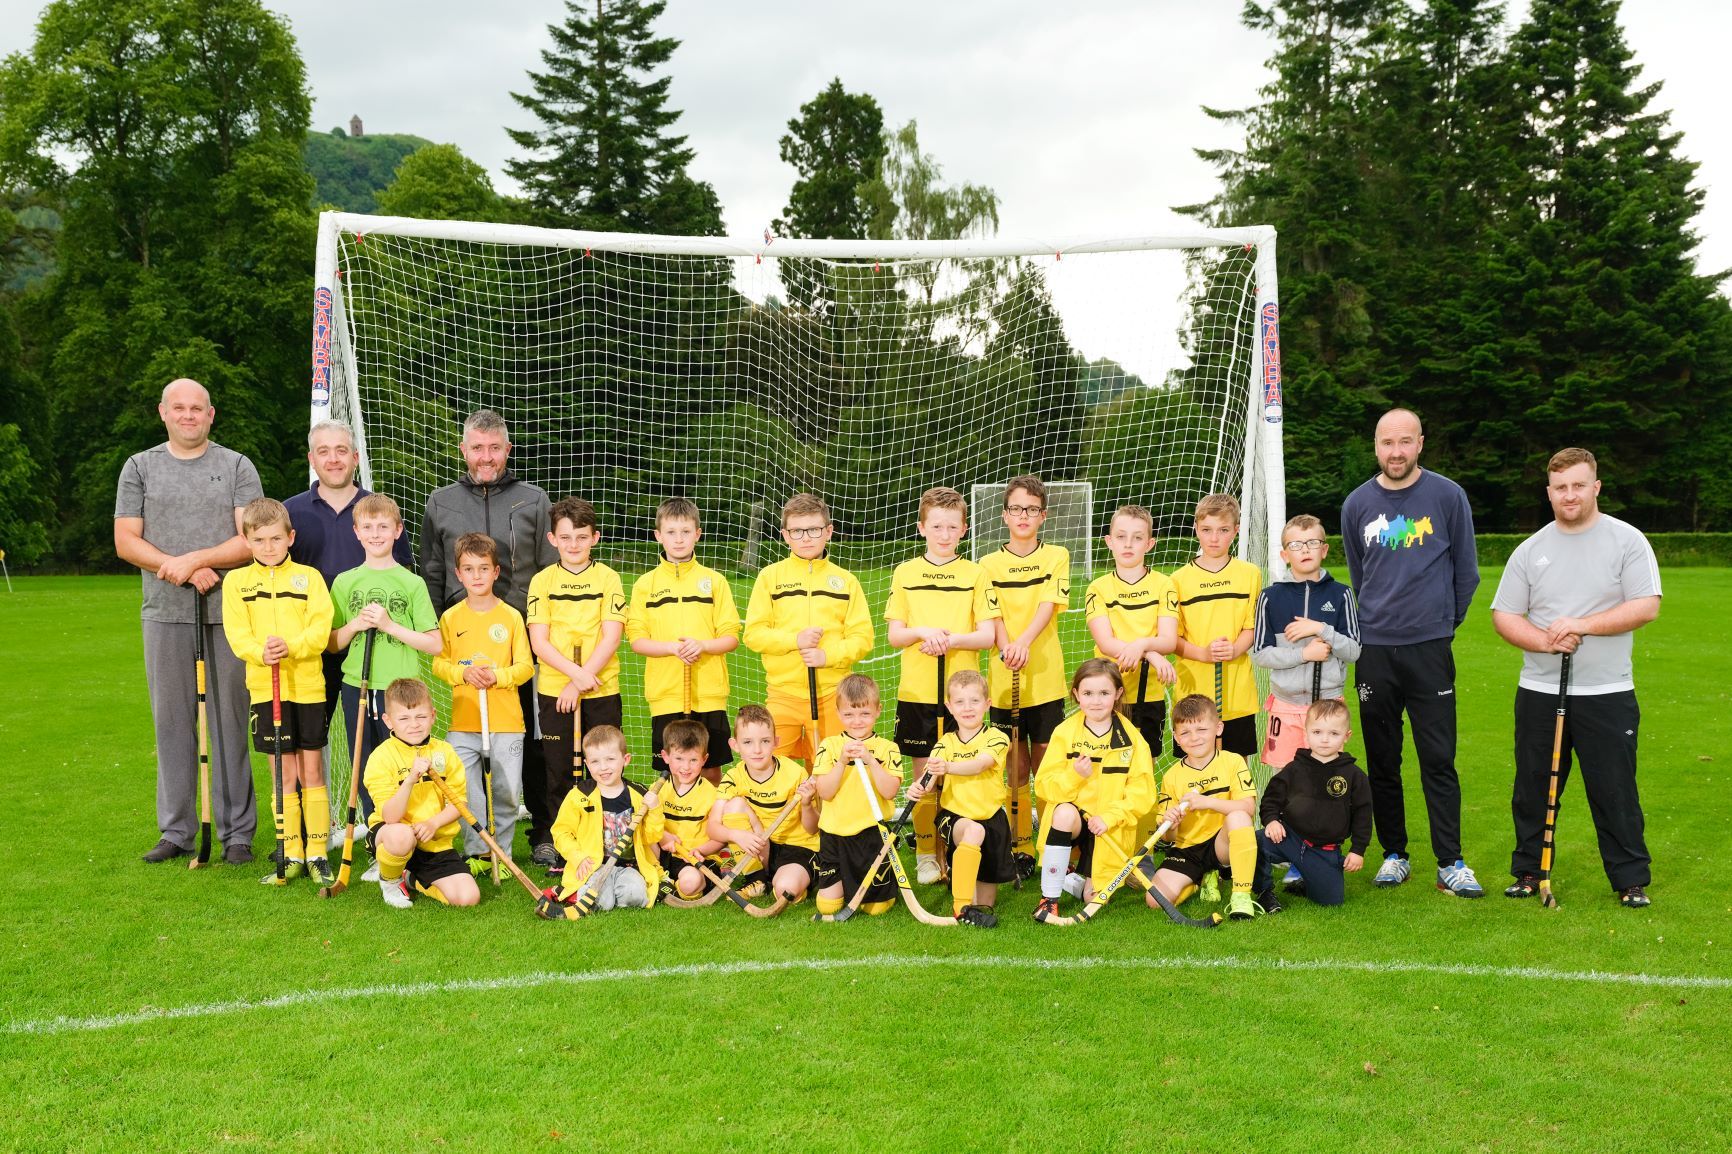 The junior team of Inveraray Shinty Club has new training kit and goal posts, thanks to the Scottish Salmon Company